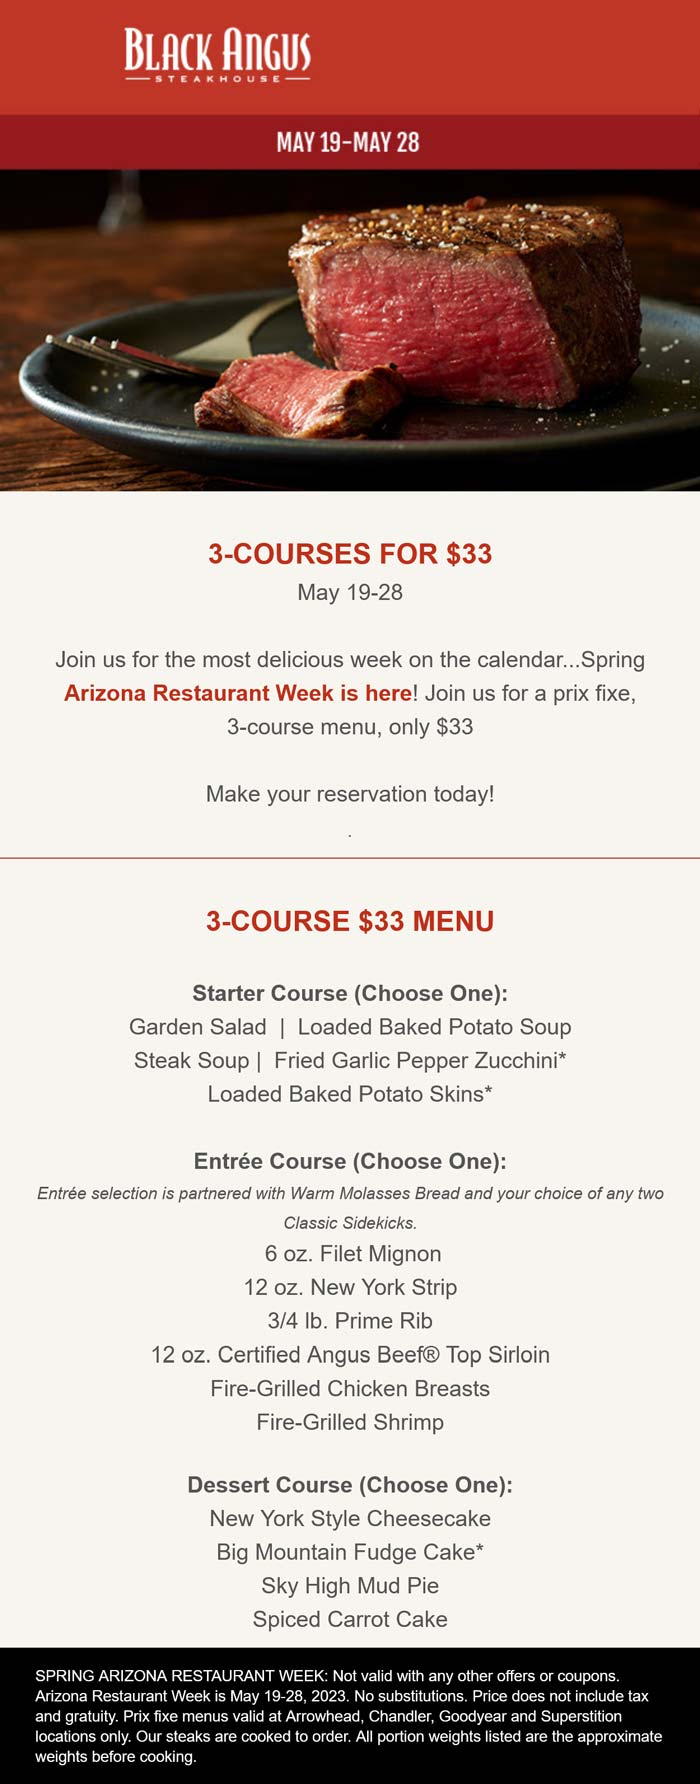 Black Angus restaurants Coupon  3 courses for $33 at Black Angus Steakhouse restaurants #blackangus 